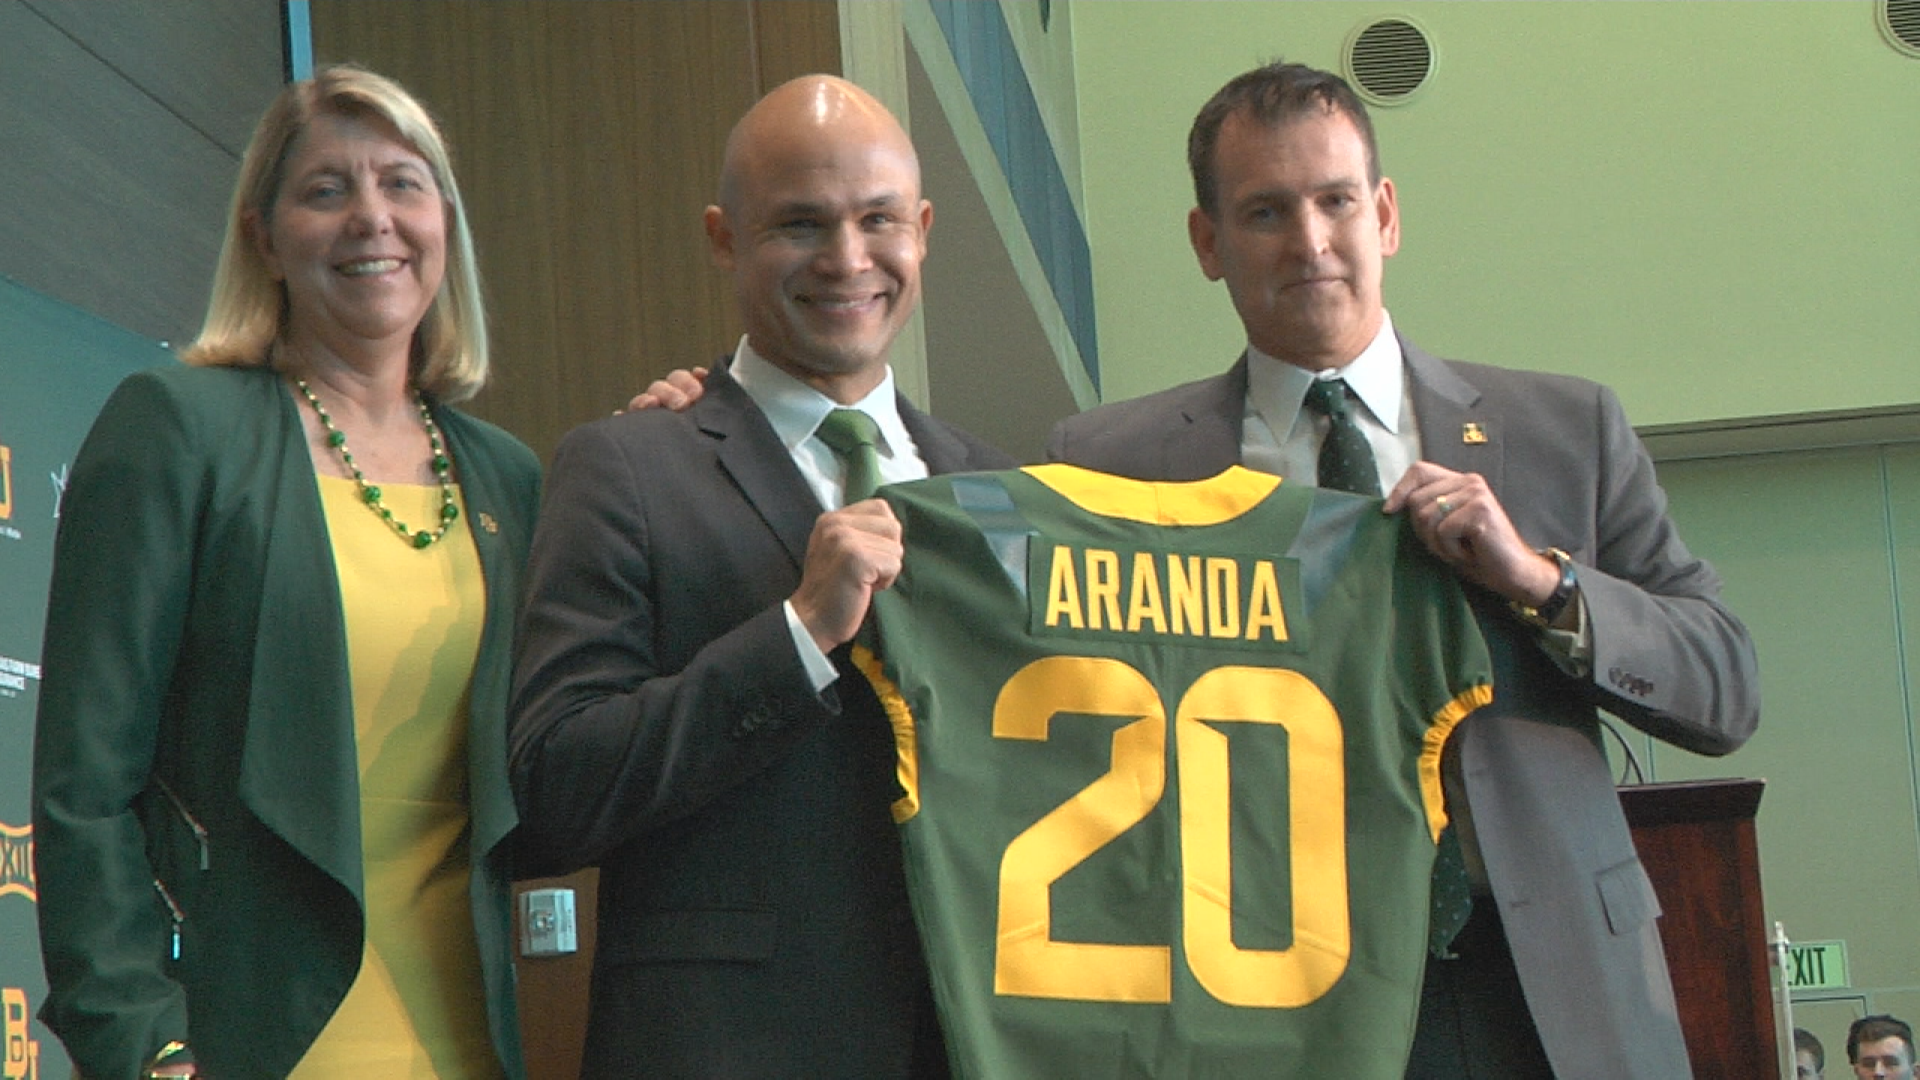 Aranda has relied on Zoom meetings to install new schemes with coaches and players.